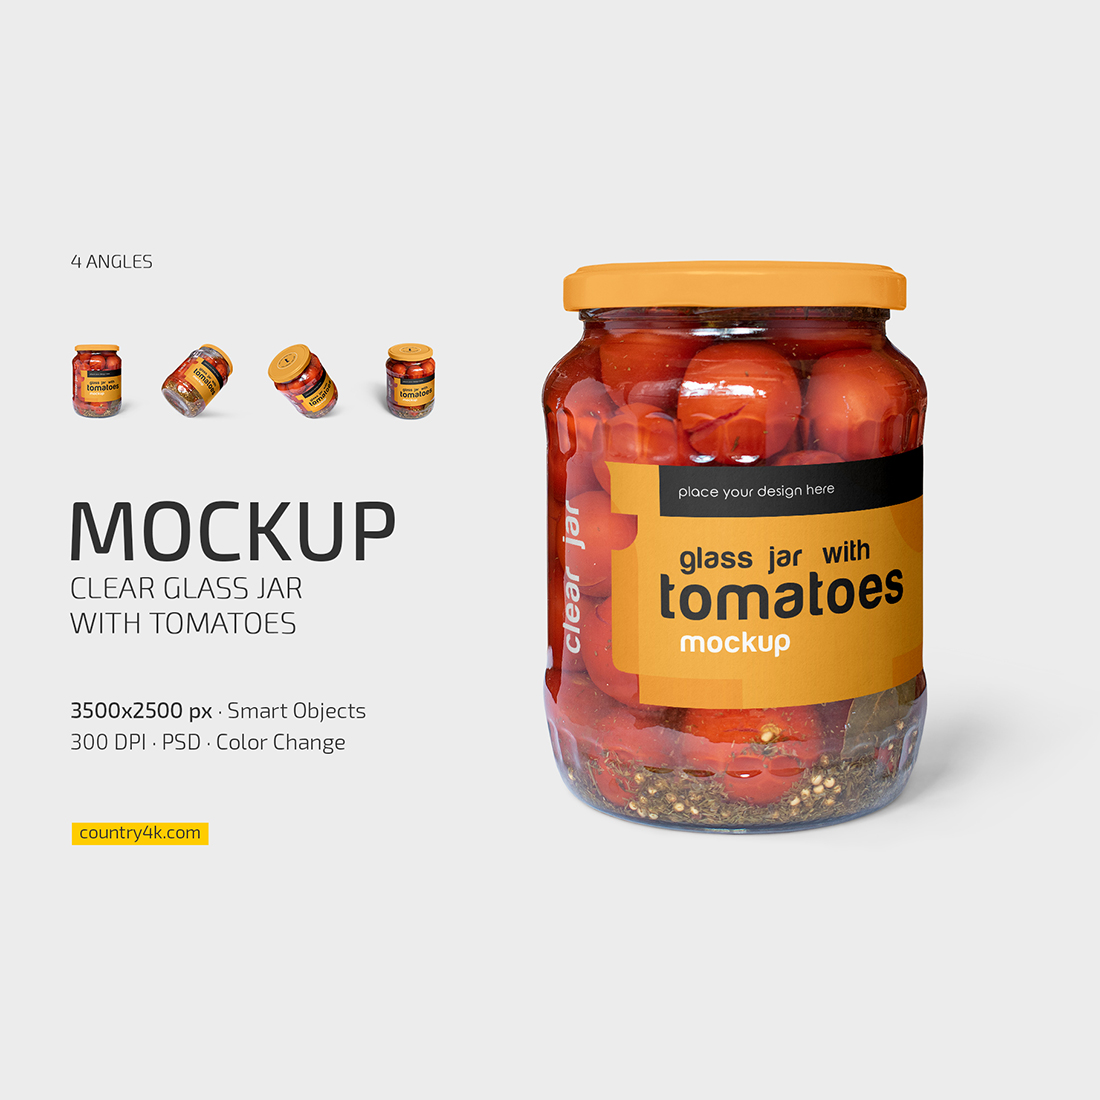 Clear Glass Jar with Tomatoes Mockup Set main cover.